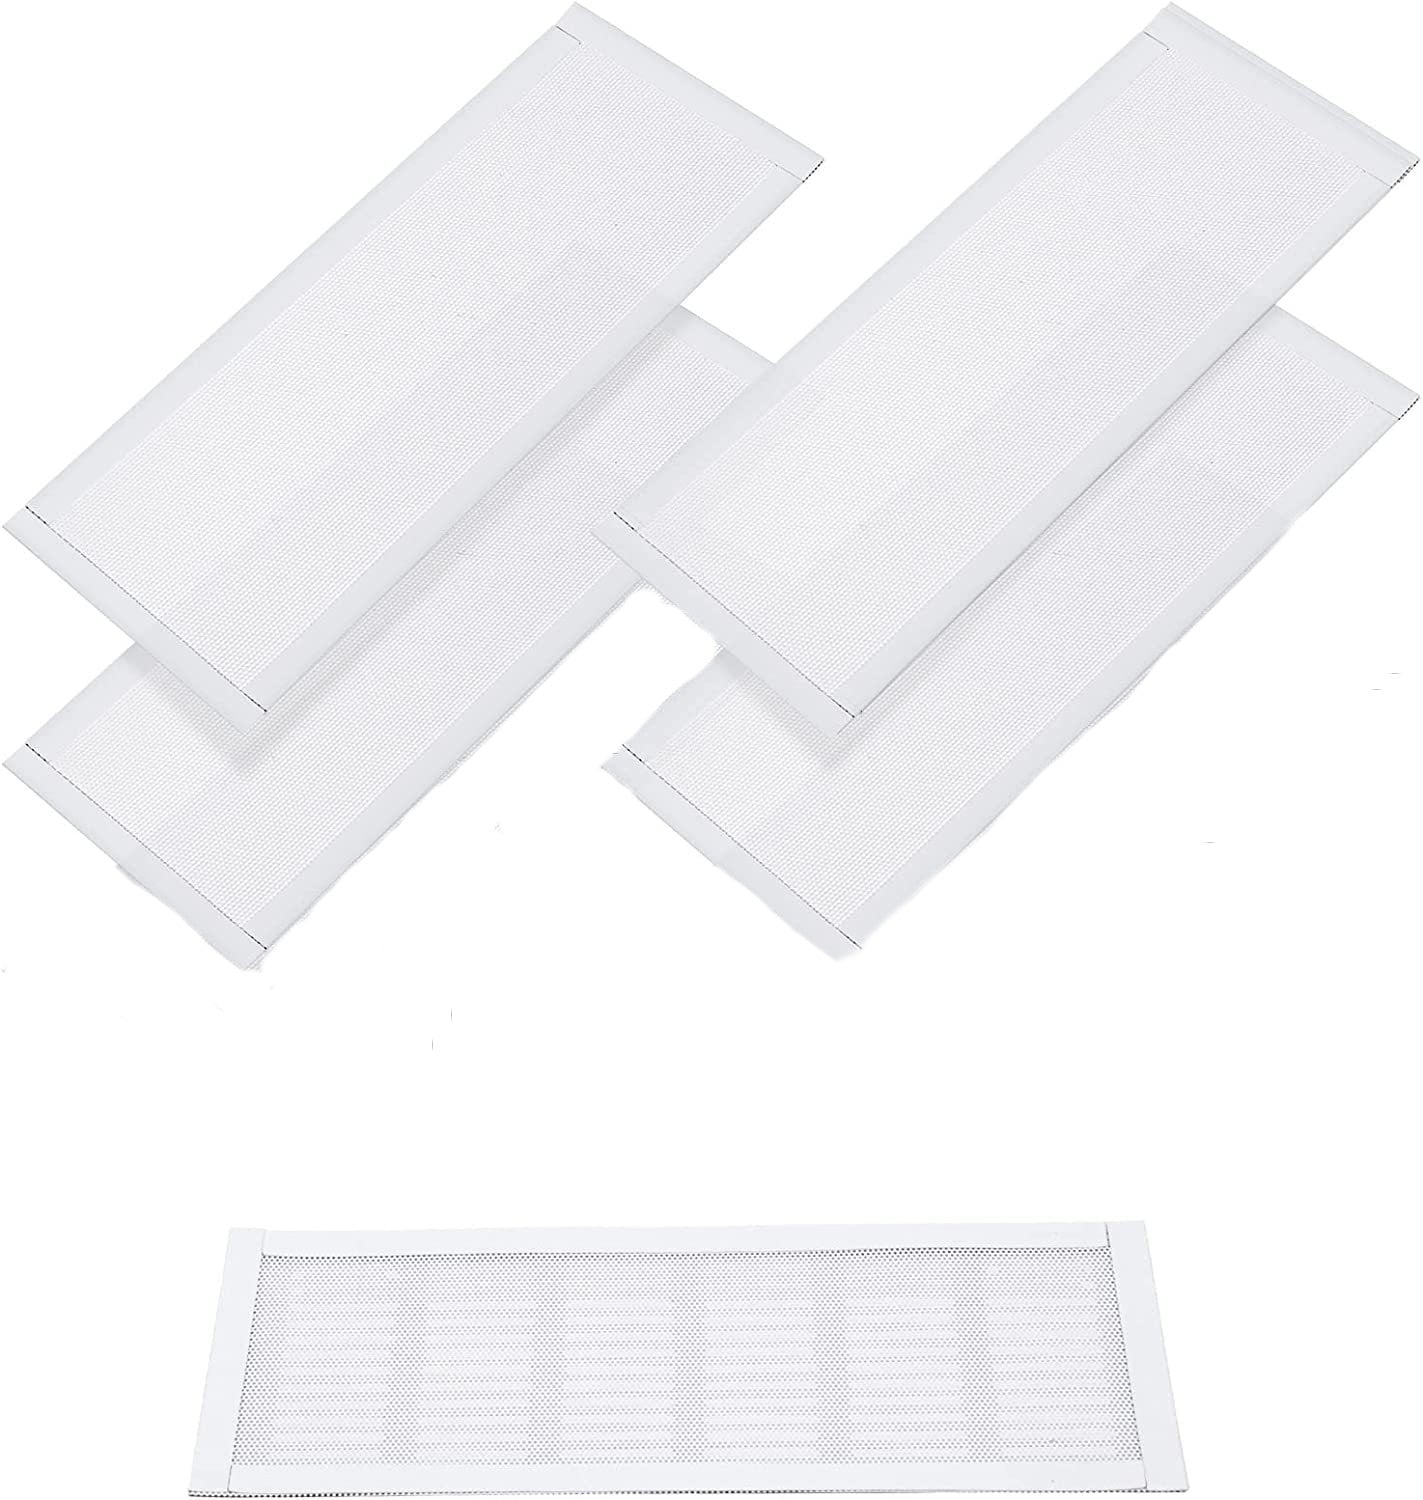 Deflecto MVCX512 Magnetic Vent Cover, White - 3 pack